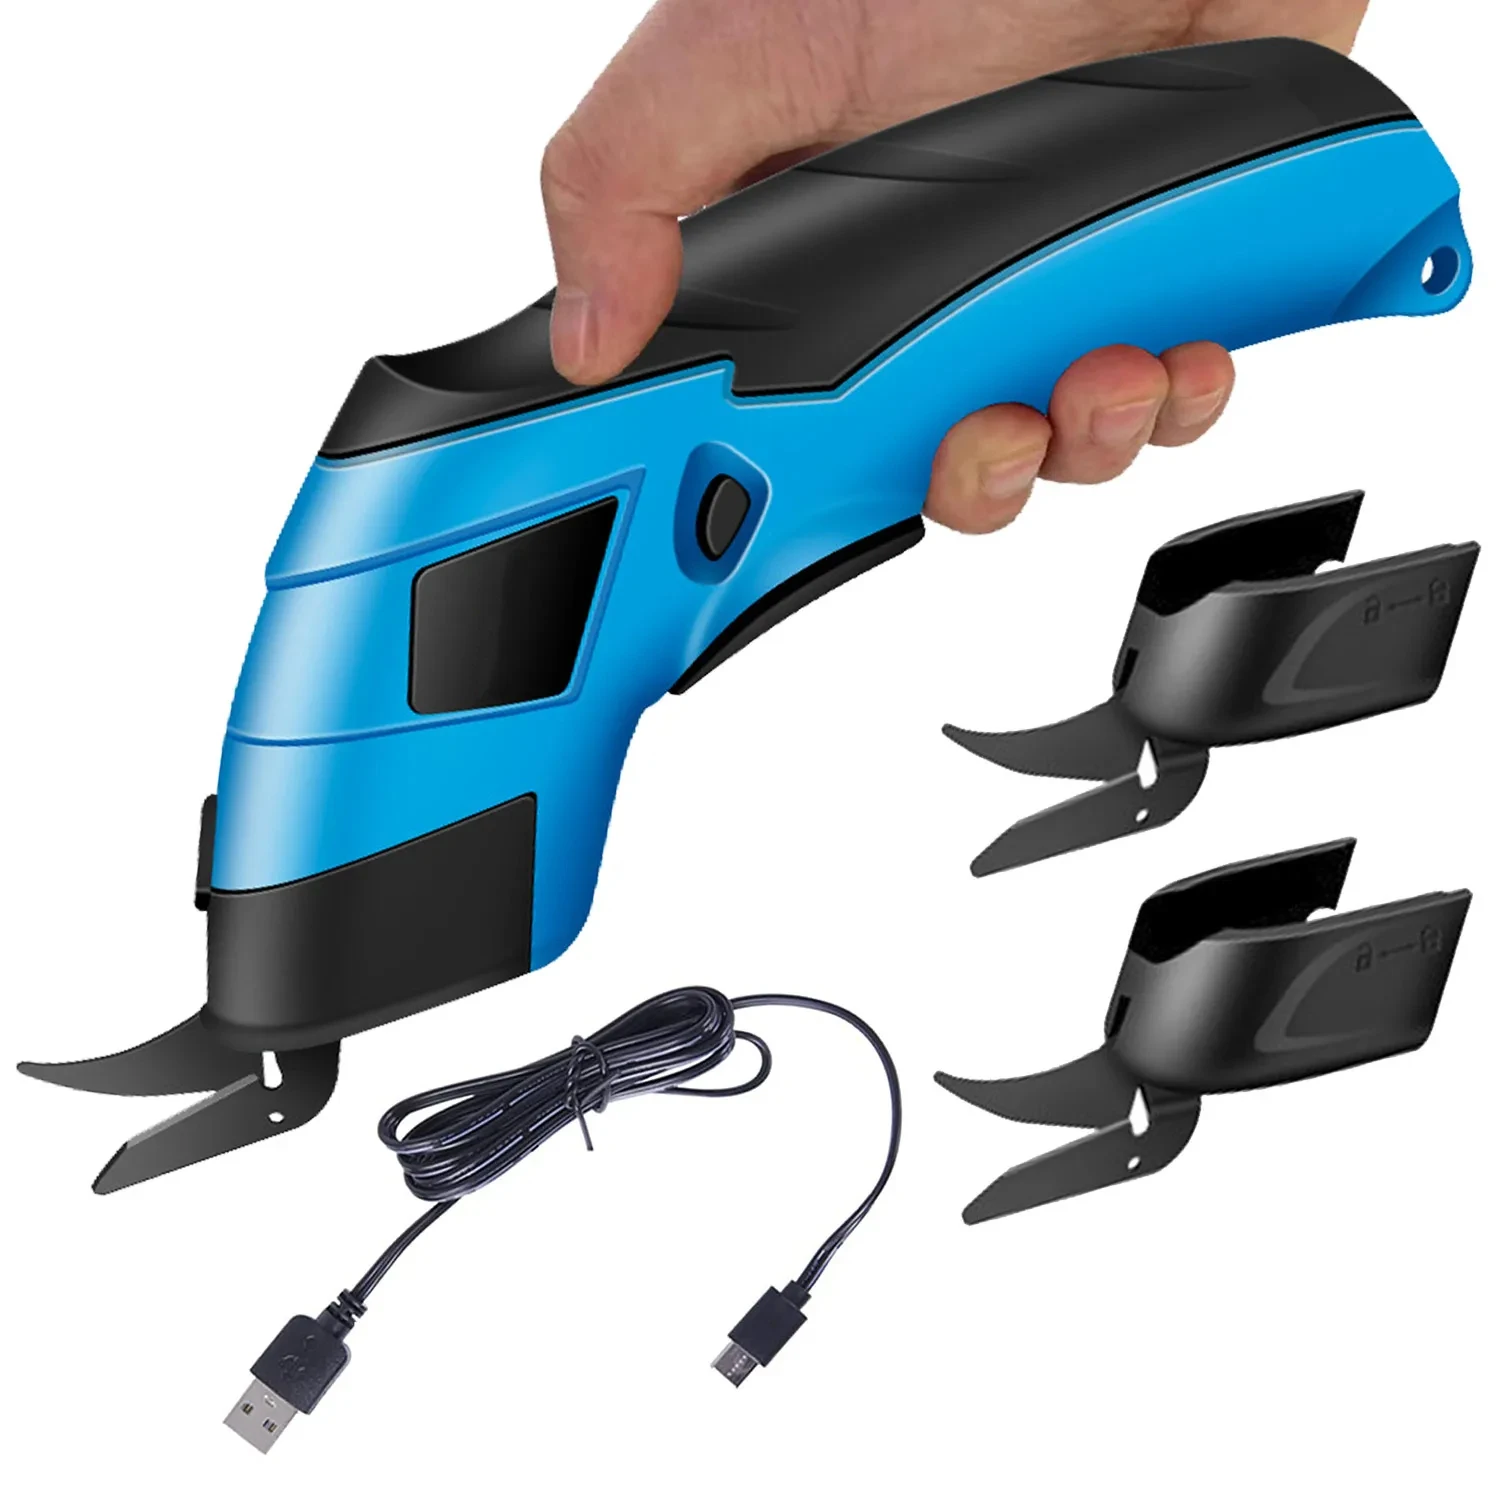 Electric Scissors Fabric Cutting Machine Leather Tailor Scissors With Tungsten Steel Blades USB Rechargeable Portable Power Tool mobile phone repair tool kit 5 in 1 ic chip blades metal disassemble crowbar pry opening hand tools set for cup bga repair